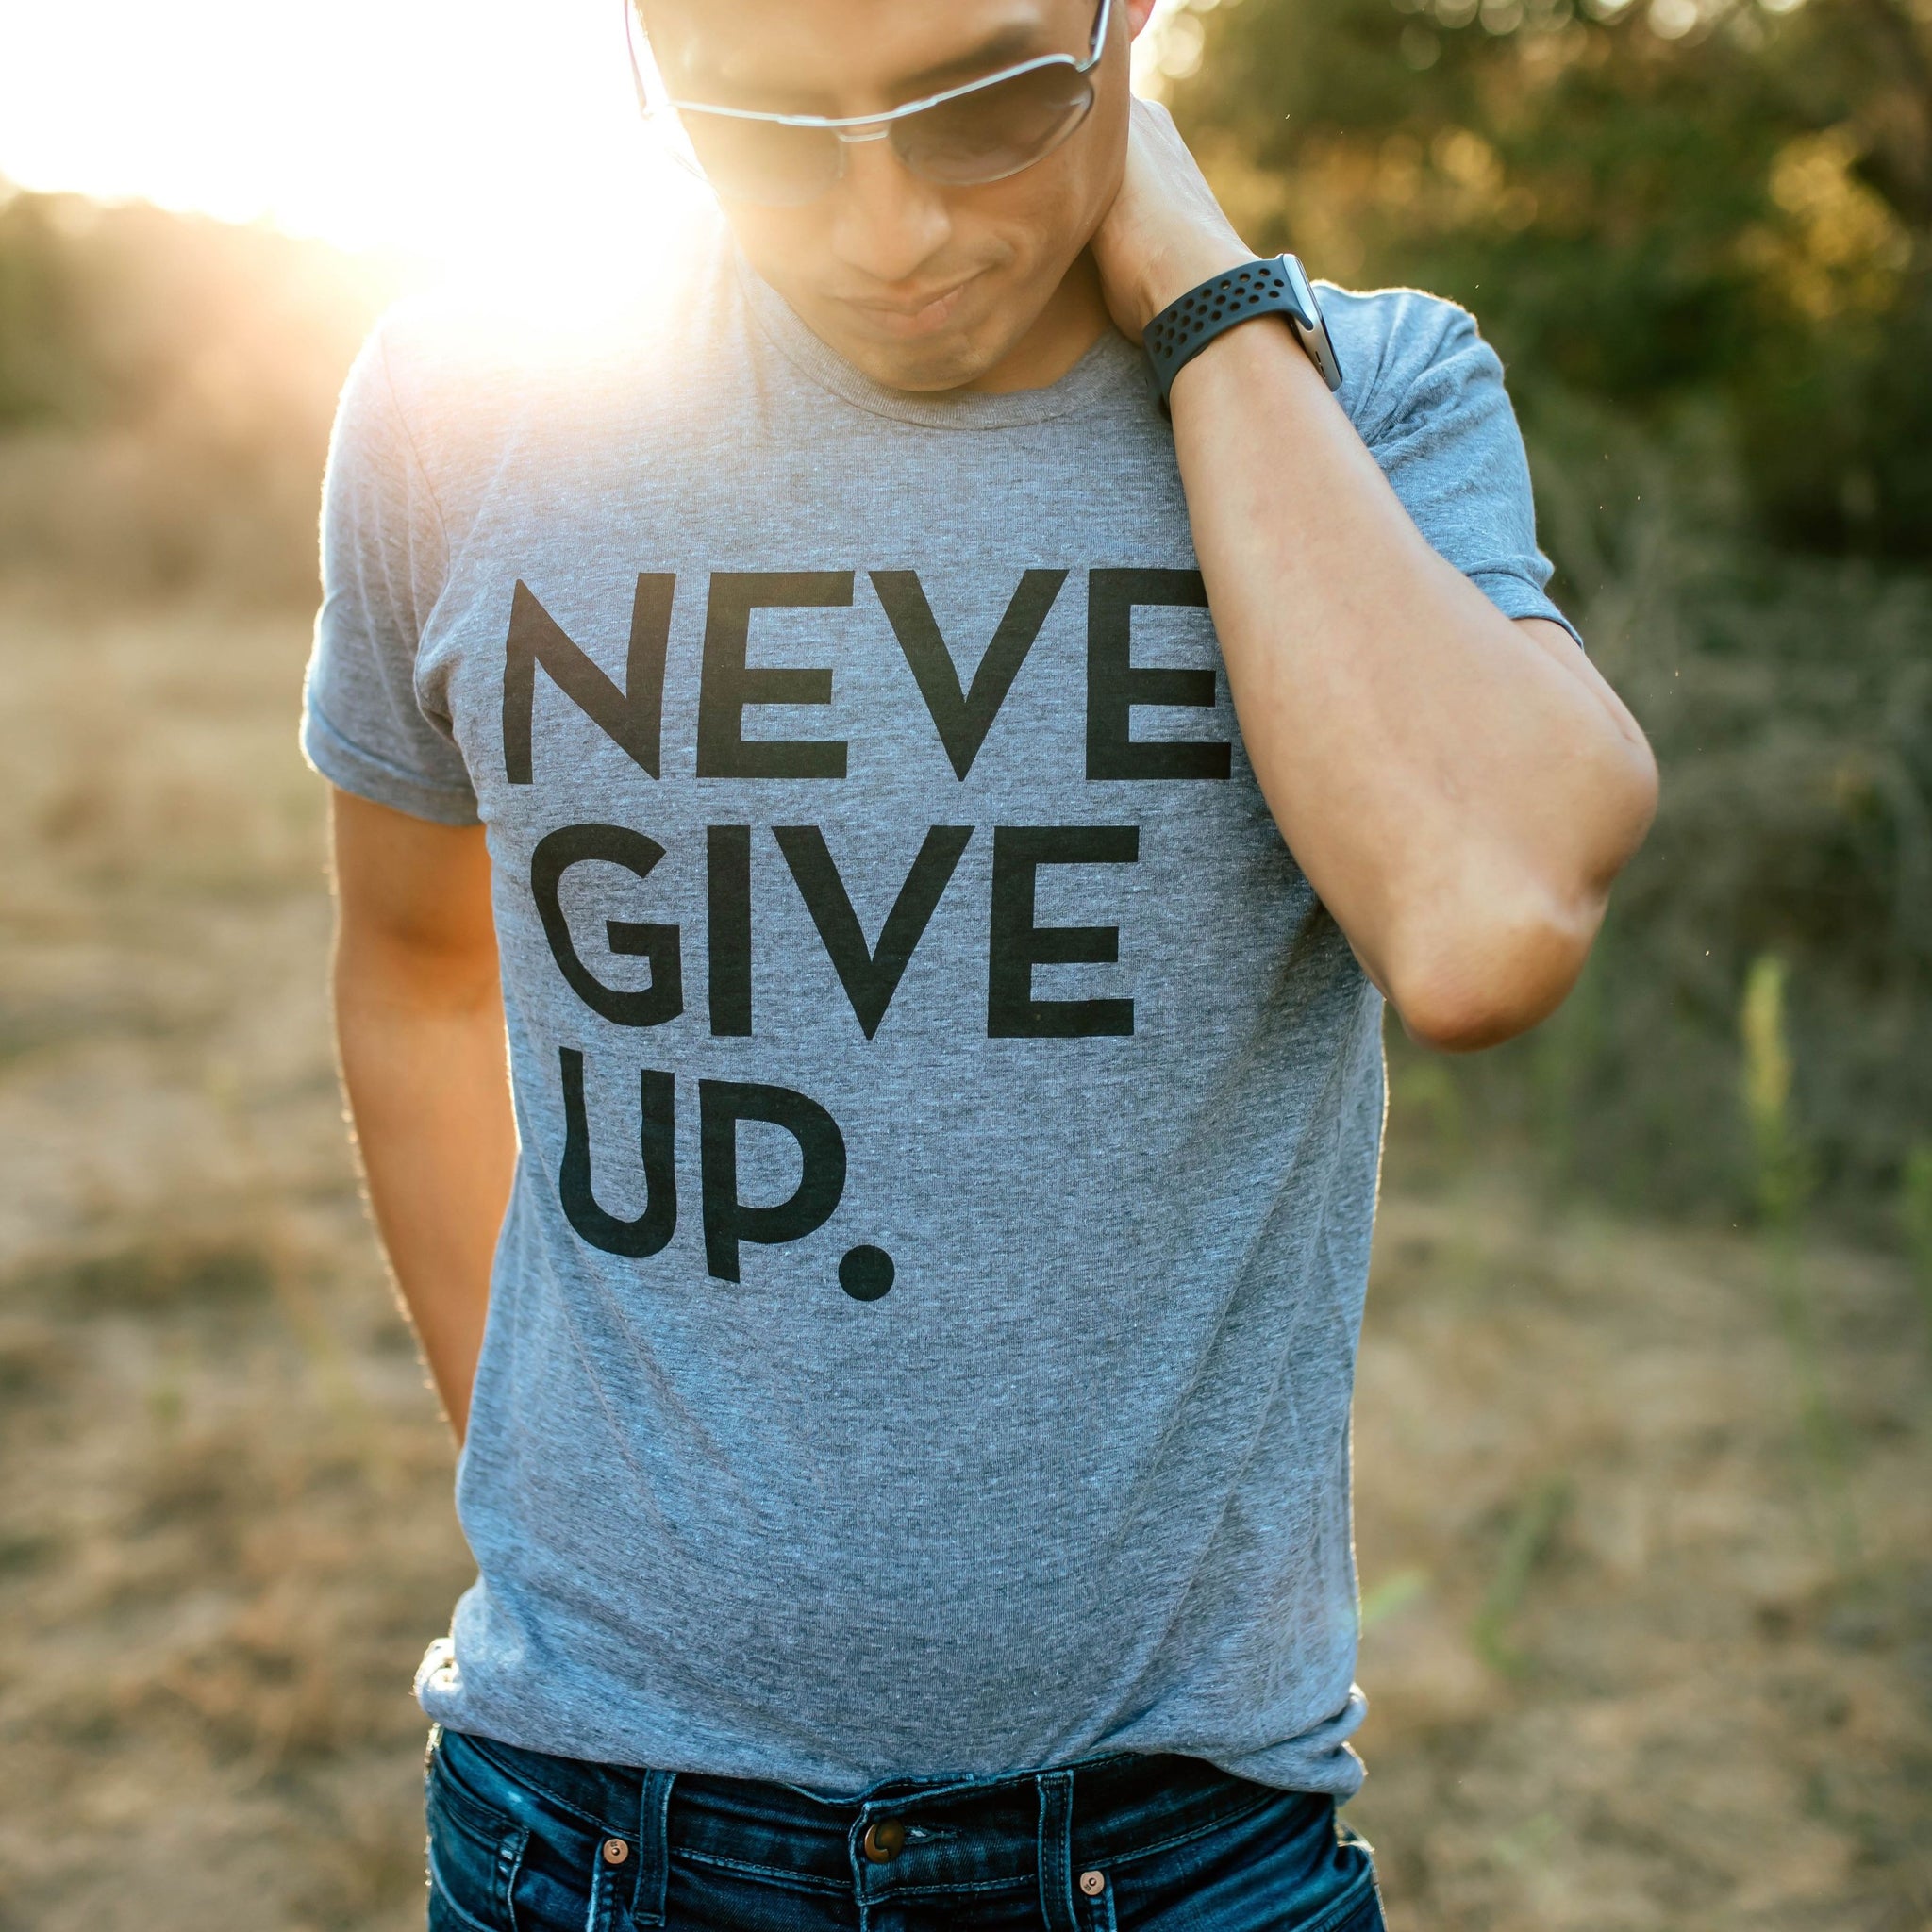 UNISEX SIGNATURE NEVER GIVE UP. TEE